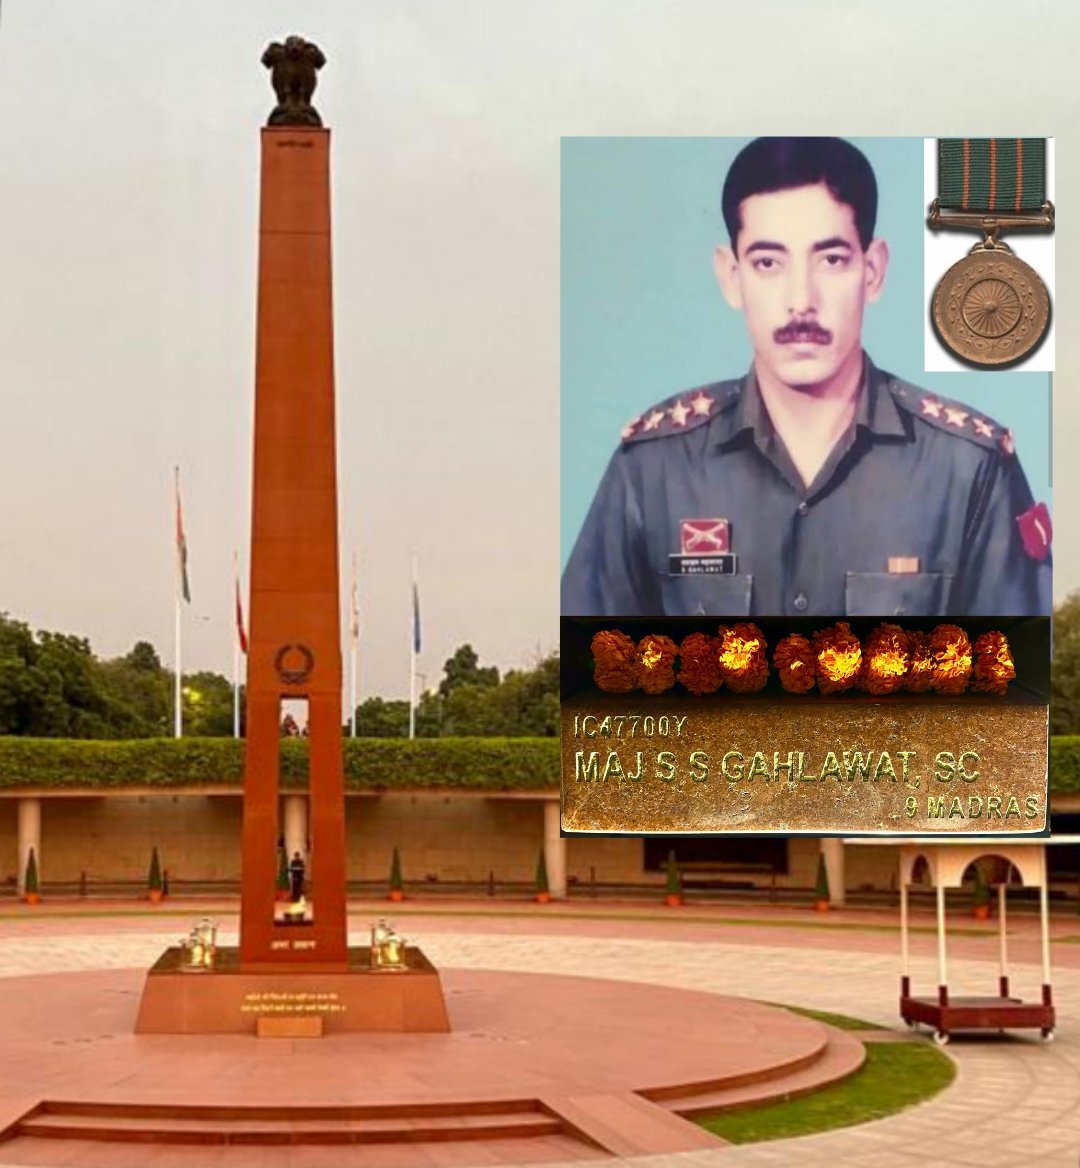 🇮🇳Maj Sajjan Singh Gahlawat, #ShauryaChakra, #9MADRAS (Travancore), led from the front and eliminated 4 dreaded Pakistani militants in a fierce operation in # Surankote, J&K during #OpRakshak #OnThisDay.#NationalWarMemorial paid homage to the gallant officer on his #BalidanDiwas.